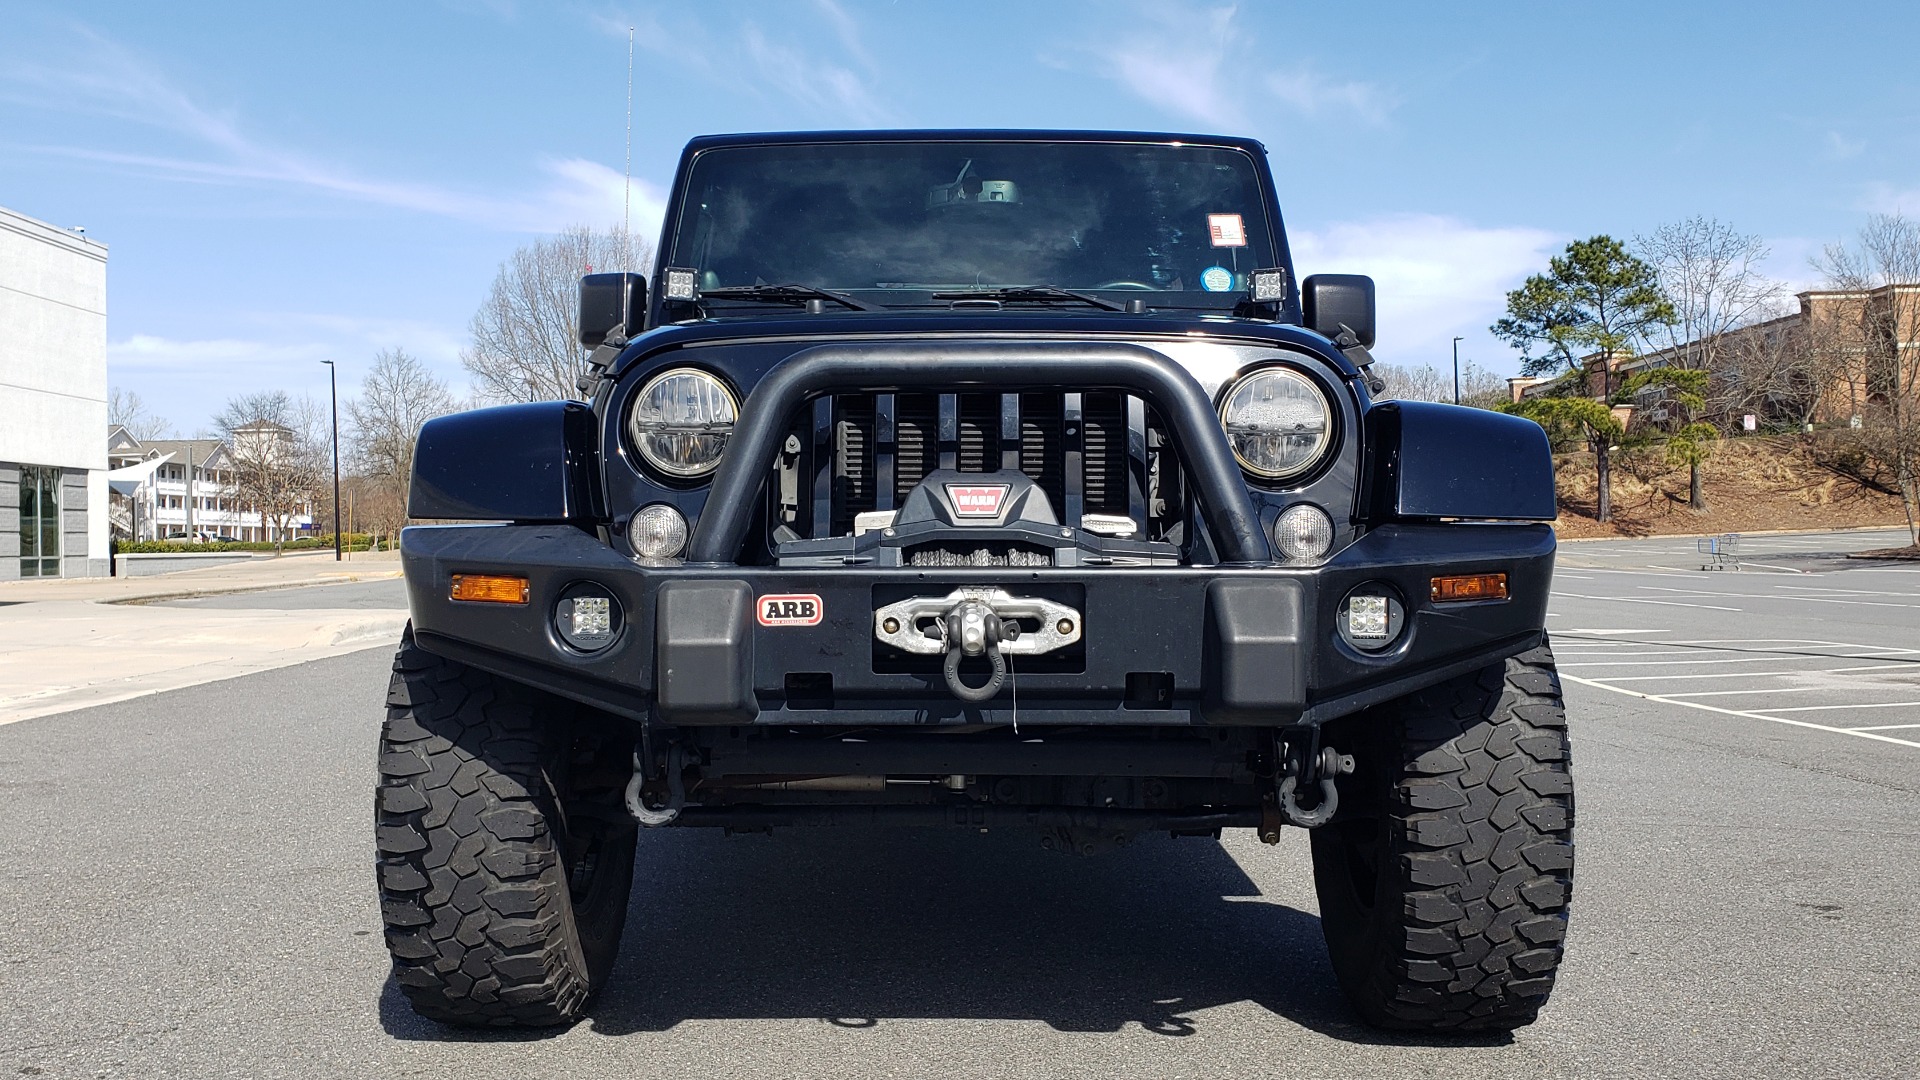 Used 2014 Jeep WRANGLER UNLIMITED SAHARA 4X4 / 3.6L V6 / 5-SPD AUTO / NAV / TOW PKG / SOFT-TOP for sale Sold at Formula Imports in Charlotte NC 28227 22